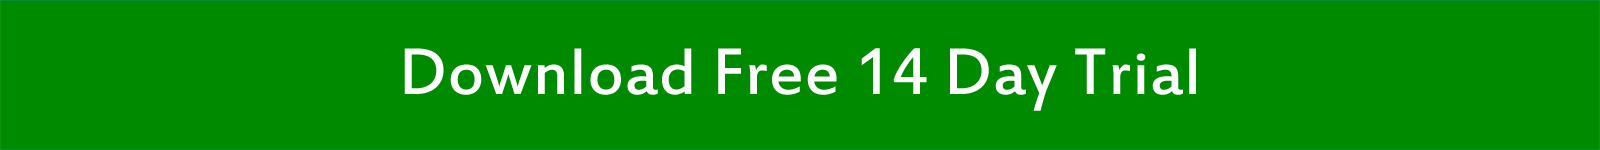 Download Free 14 Day Trial